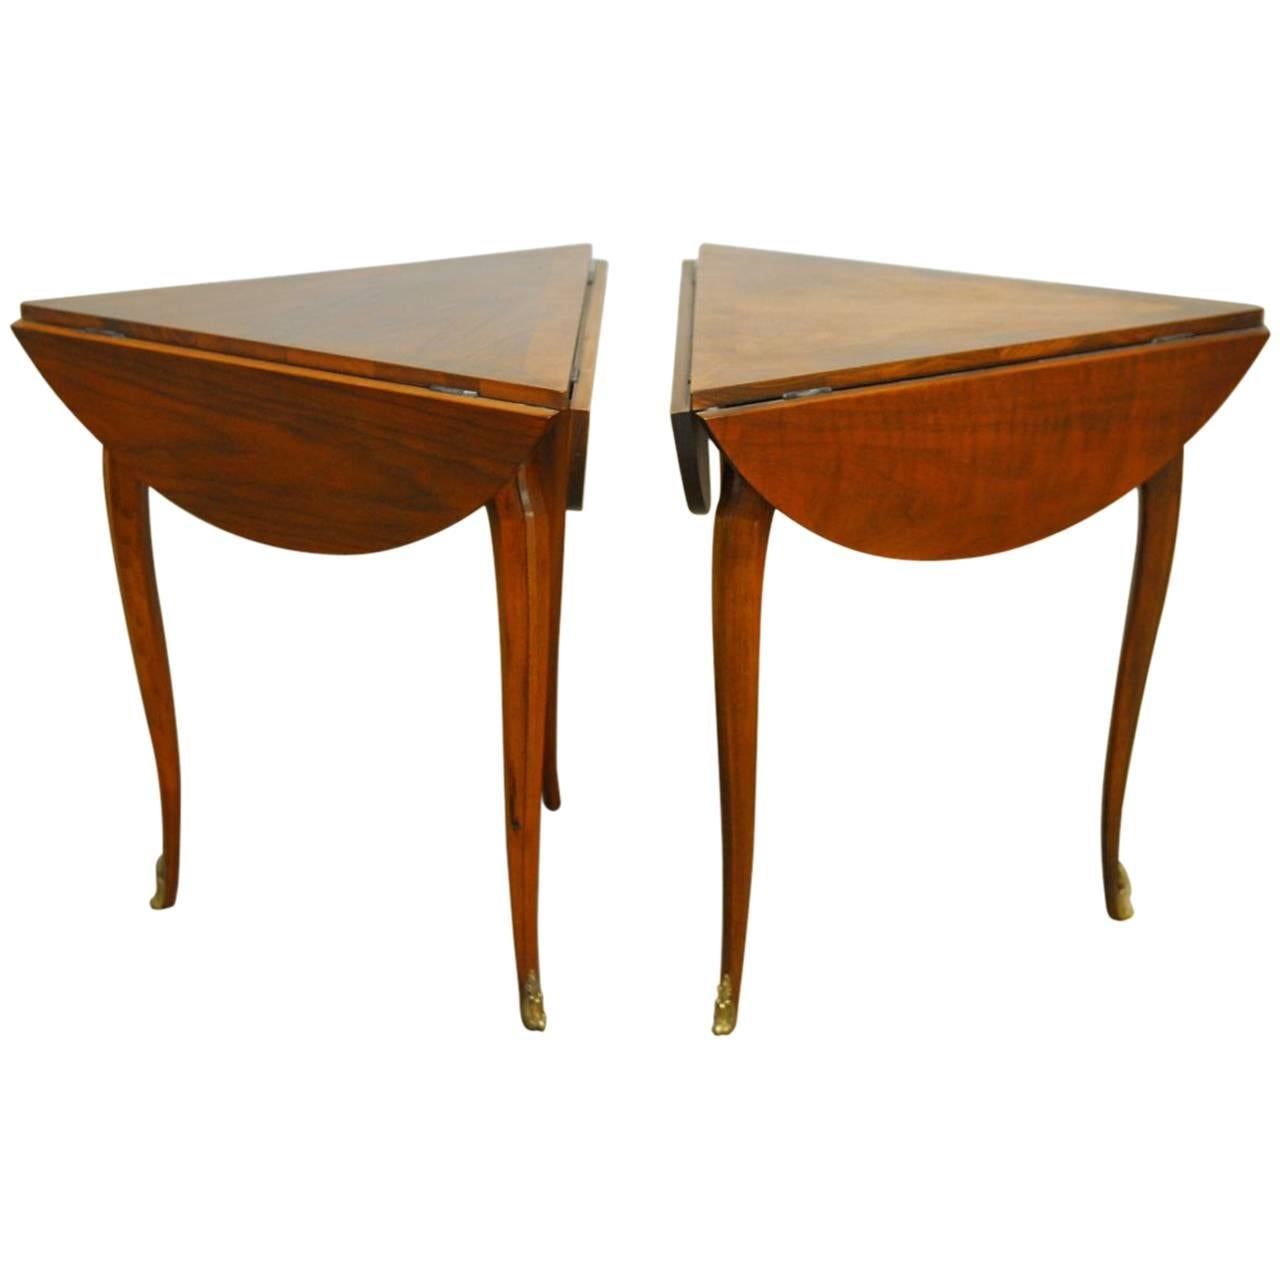 Pair of Louis XV Round Mahogany Drop Leaf Tables by Baker